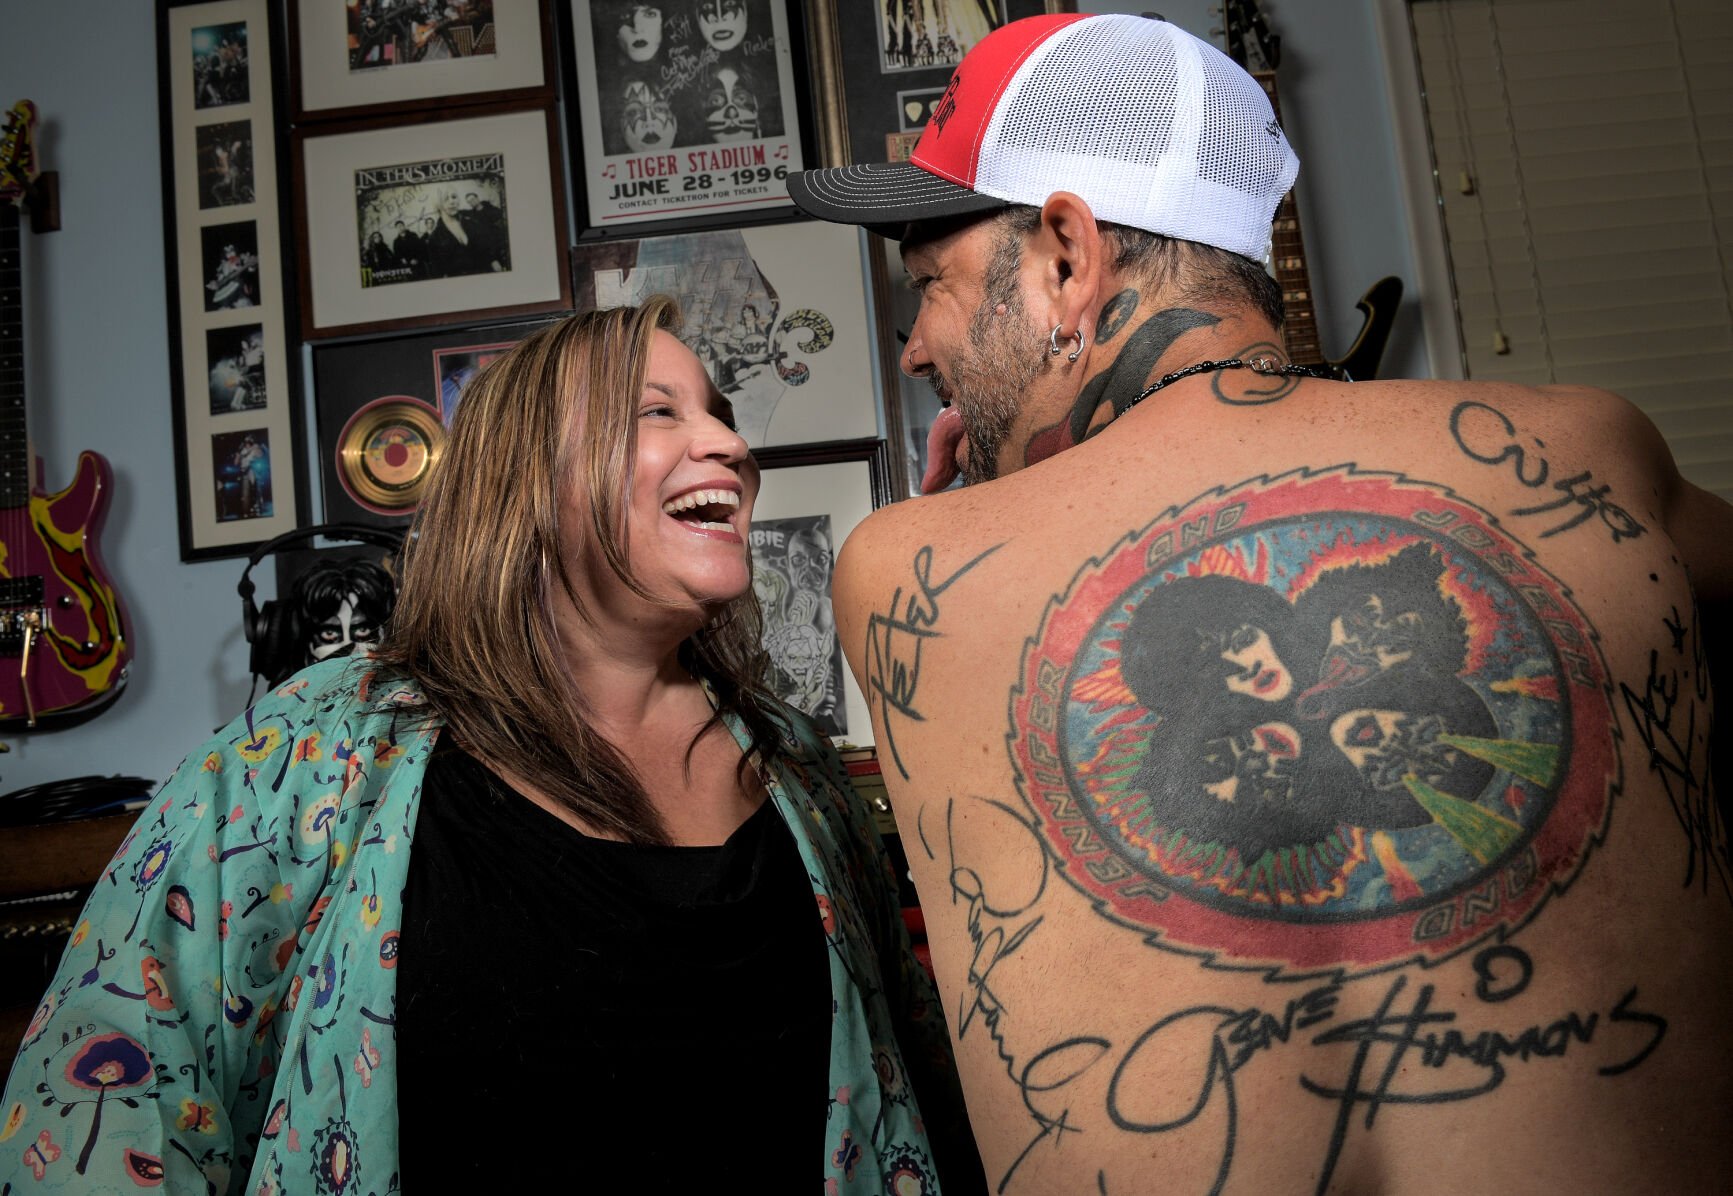 Fan succeeds in 17year quest to get Kiss autographs tattooed on his back  I did it  Arts  nolacom